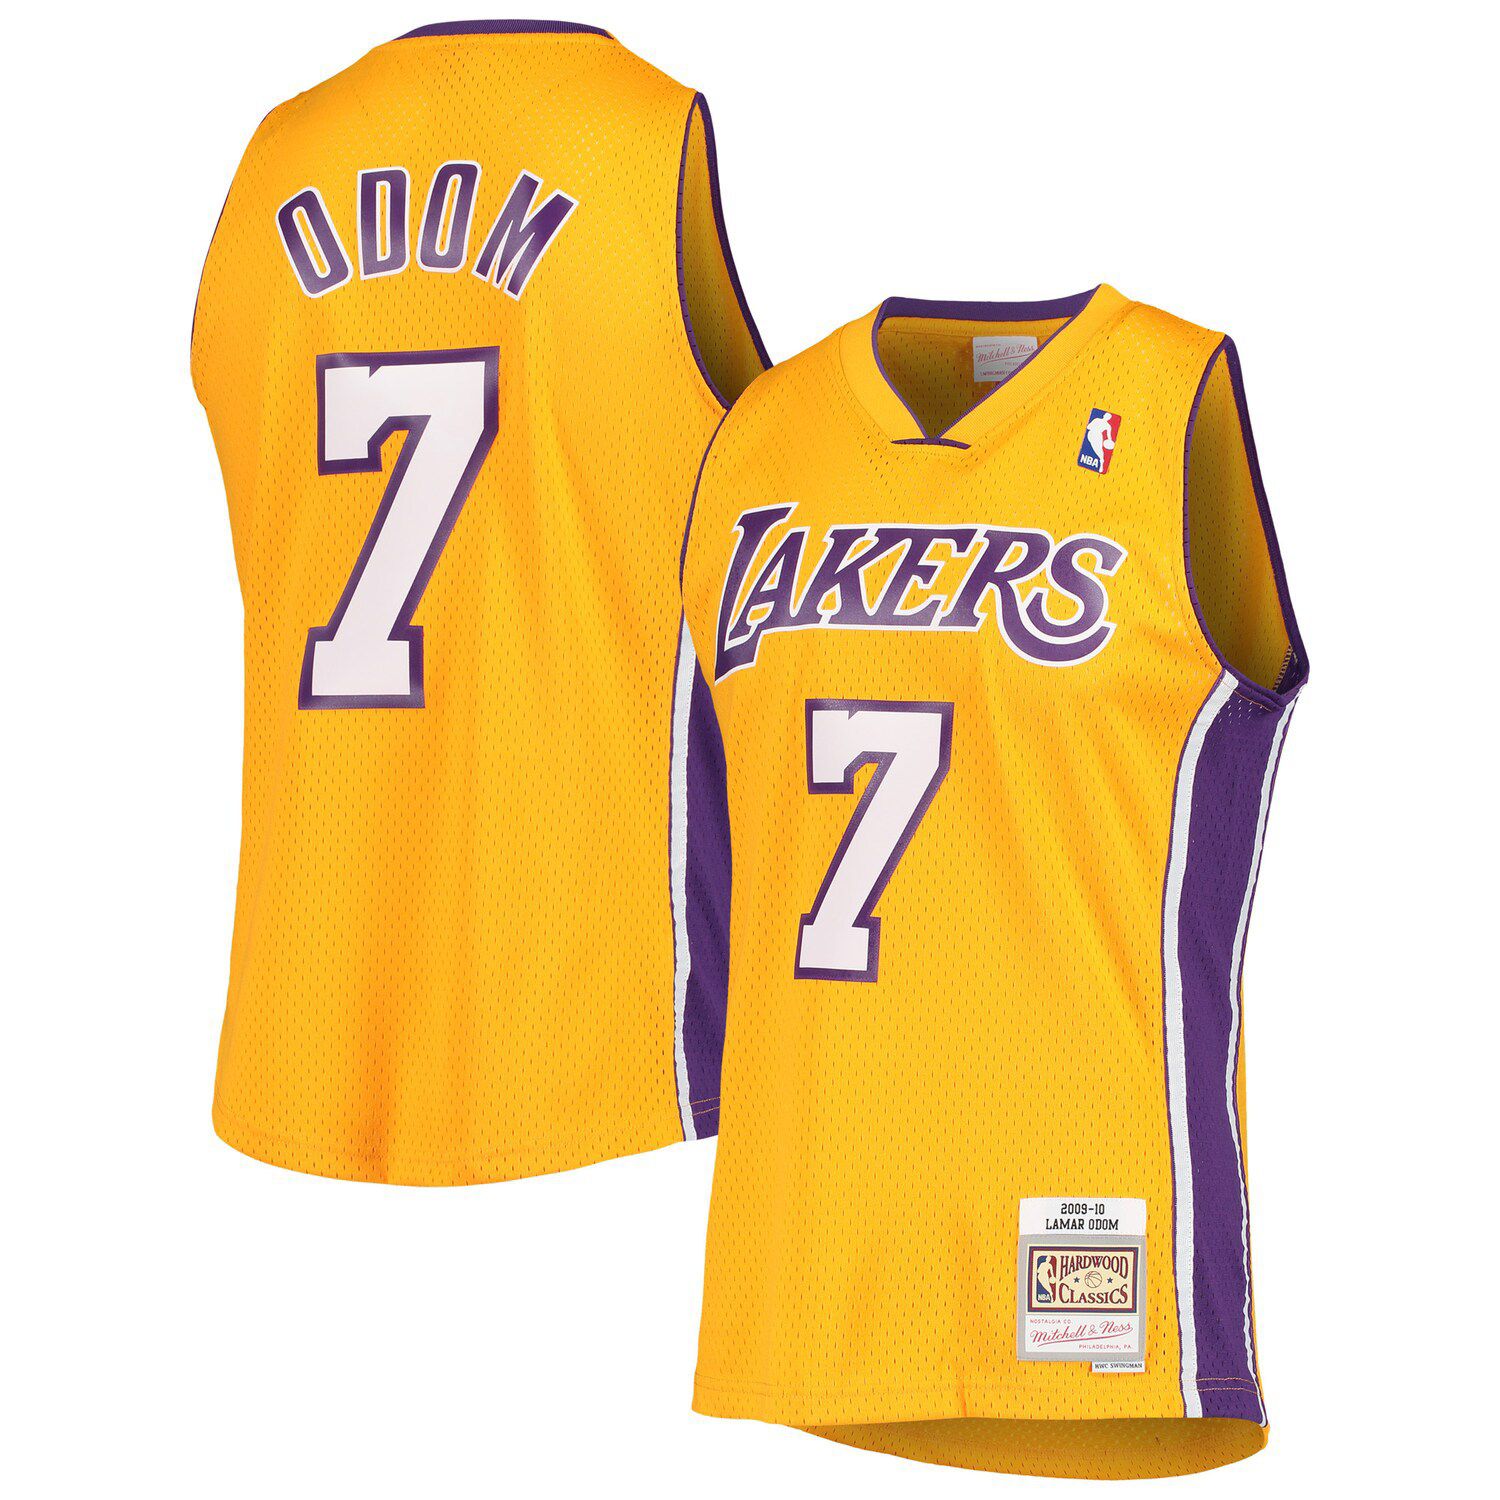 Homage LeBron James Los Angeles Lakers Gold 23 Jerseys 3X